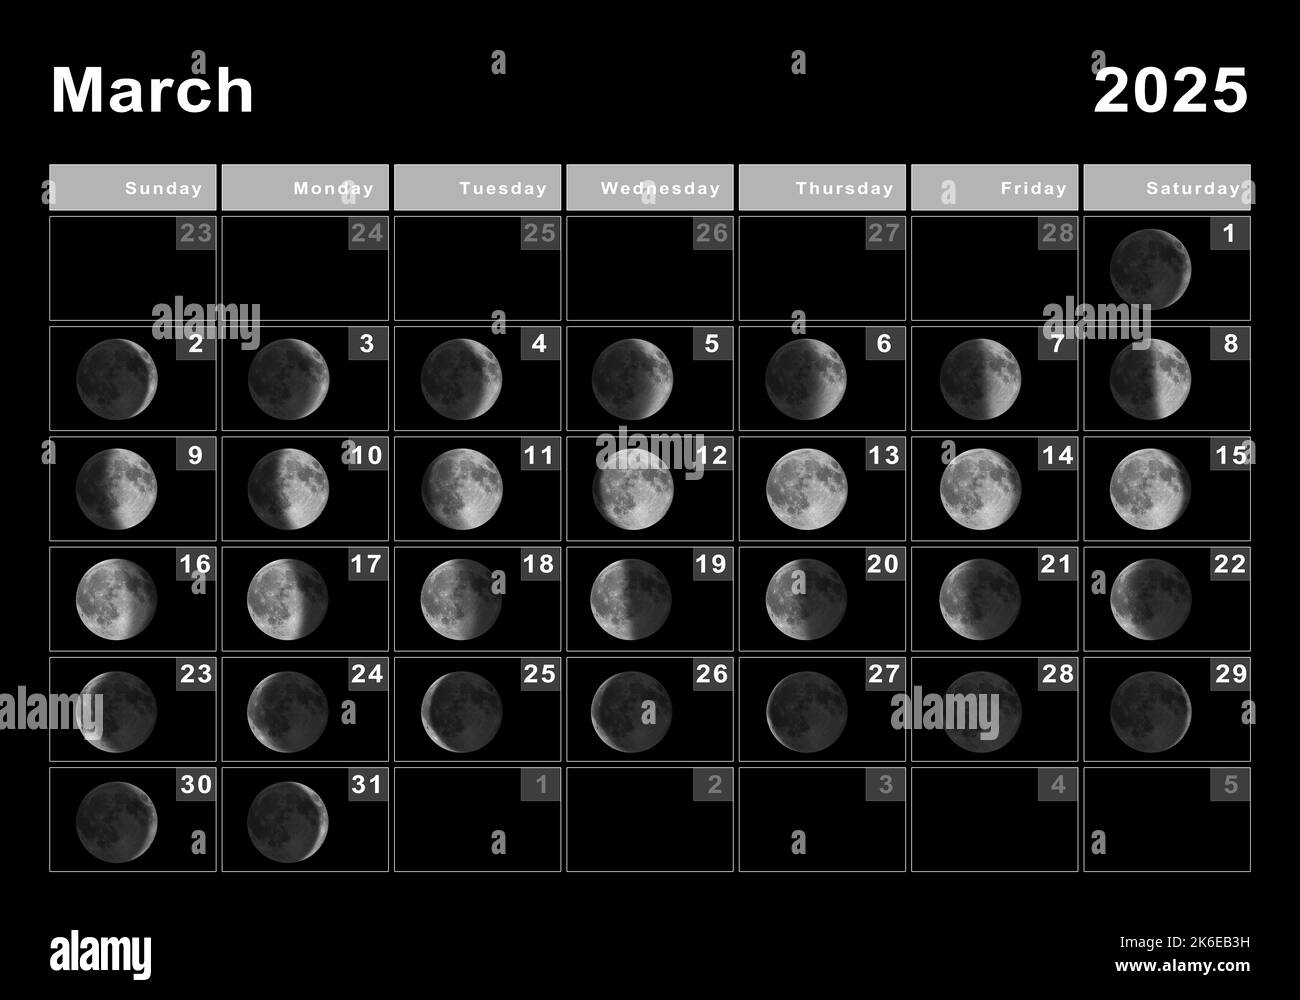 March 2025 Lunar calendar, Moon cycles, Moon Phases Stock Photo